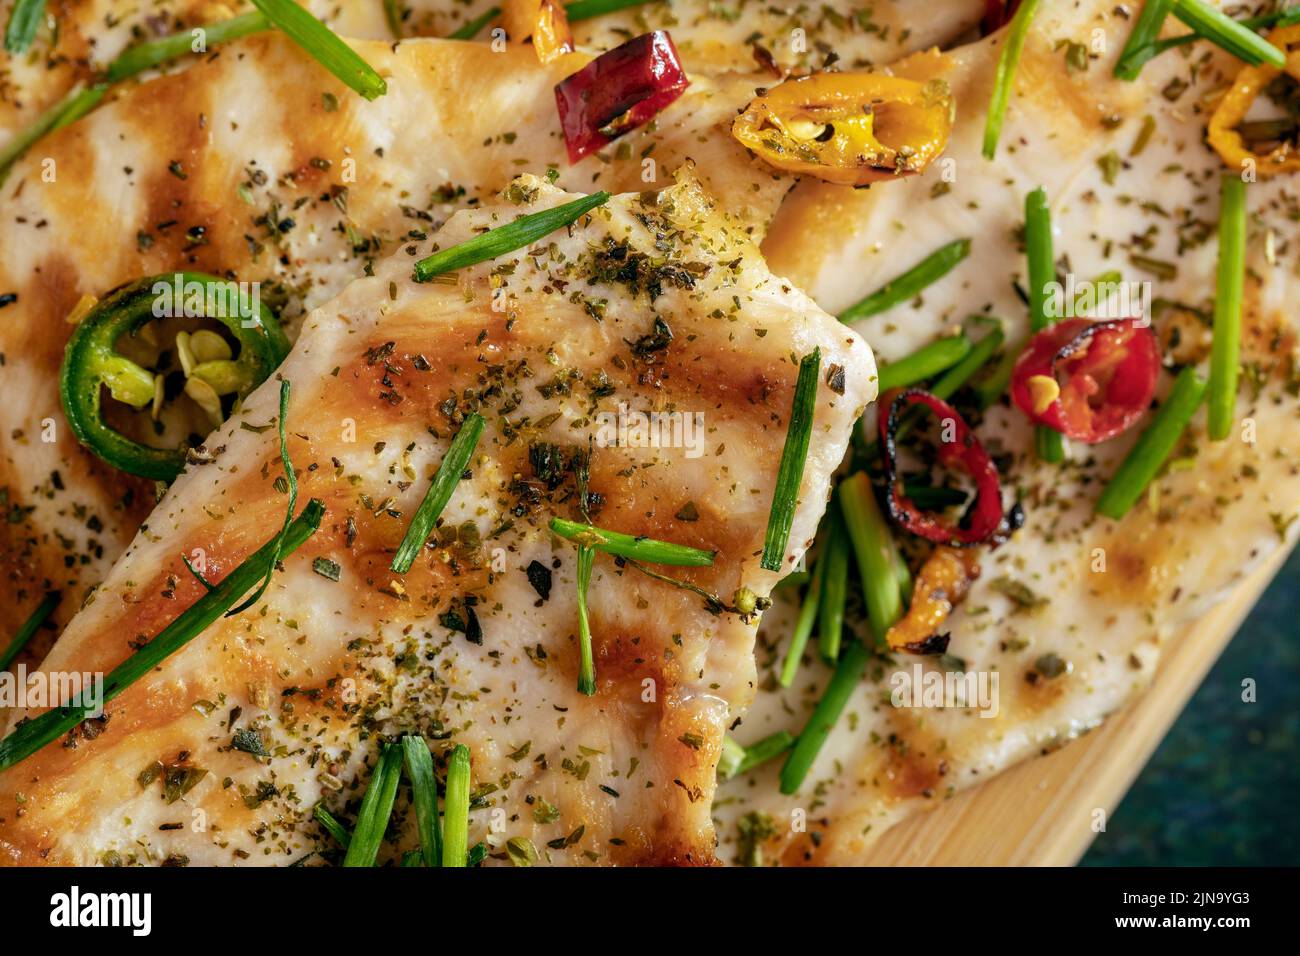 Macro close-up of grilled chicken breast cooked with three different colors chili peppers and aromatic herbs. Stock Photo